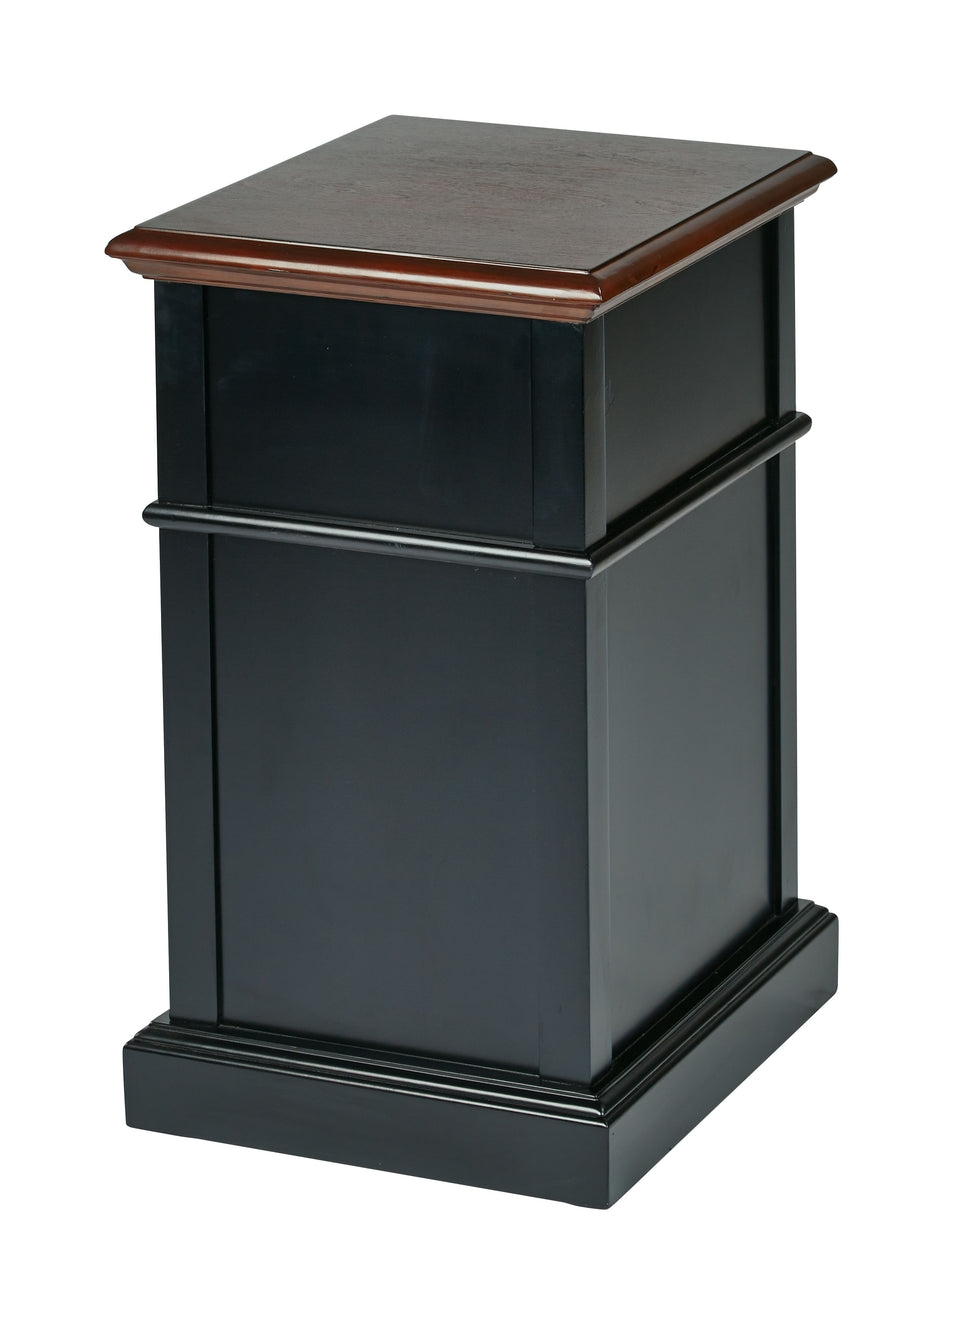 oxford two tone walnut and black side table with single drawer and door with metal knob back